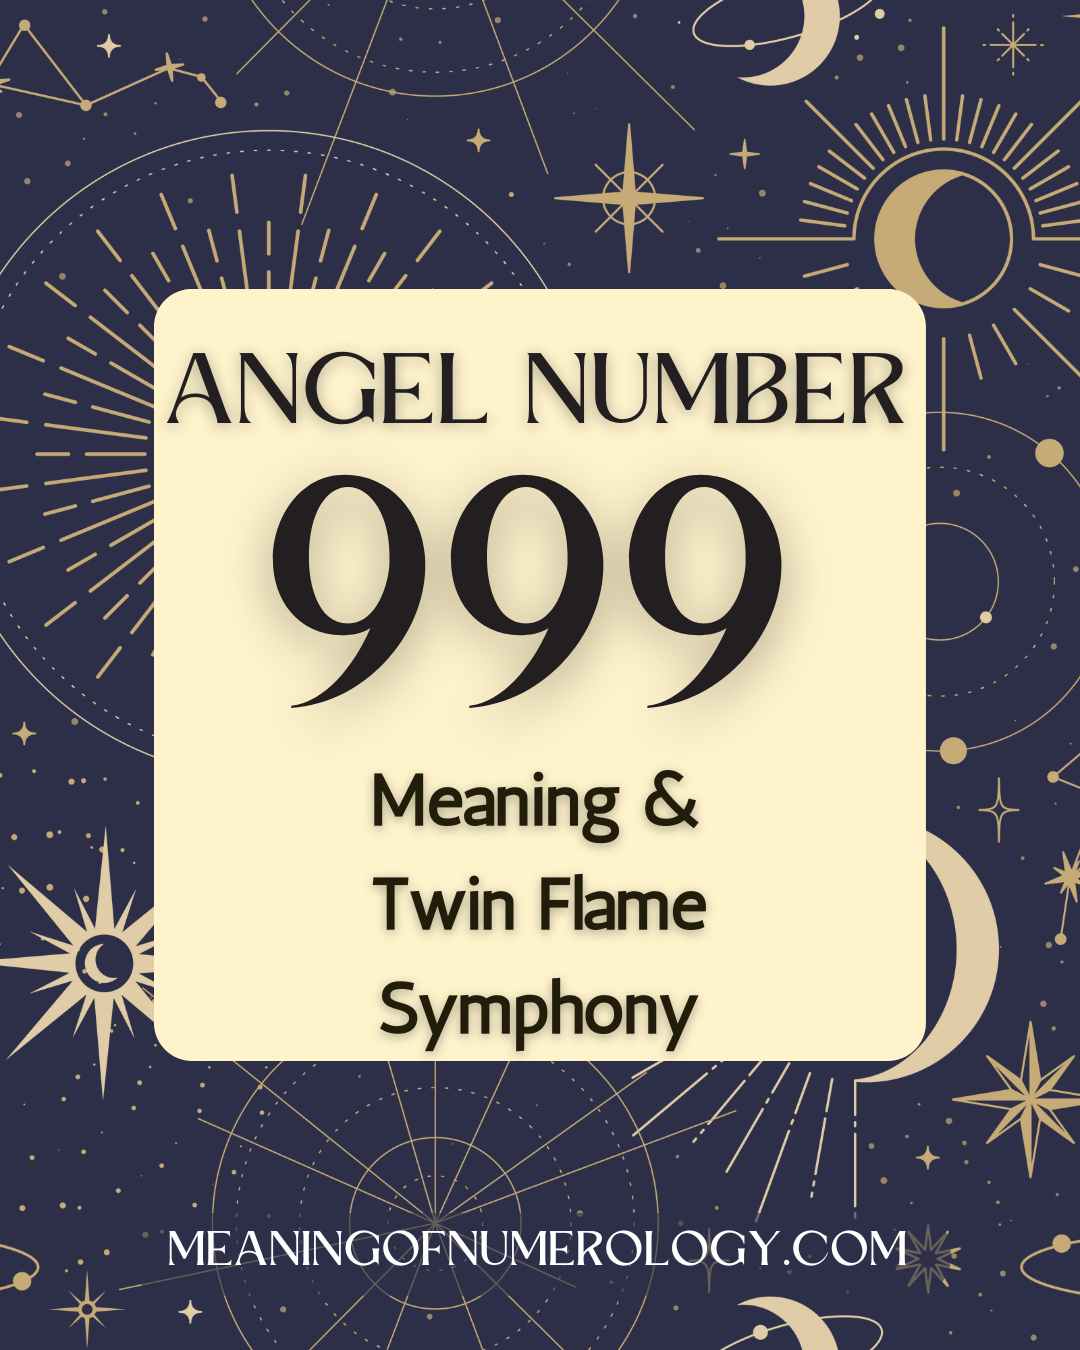 Purple Mystic Astrology Moon Angel Number 999 Meaning & Twin Flame Symphony